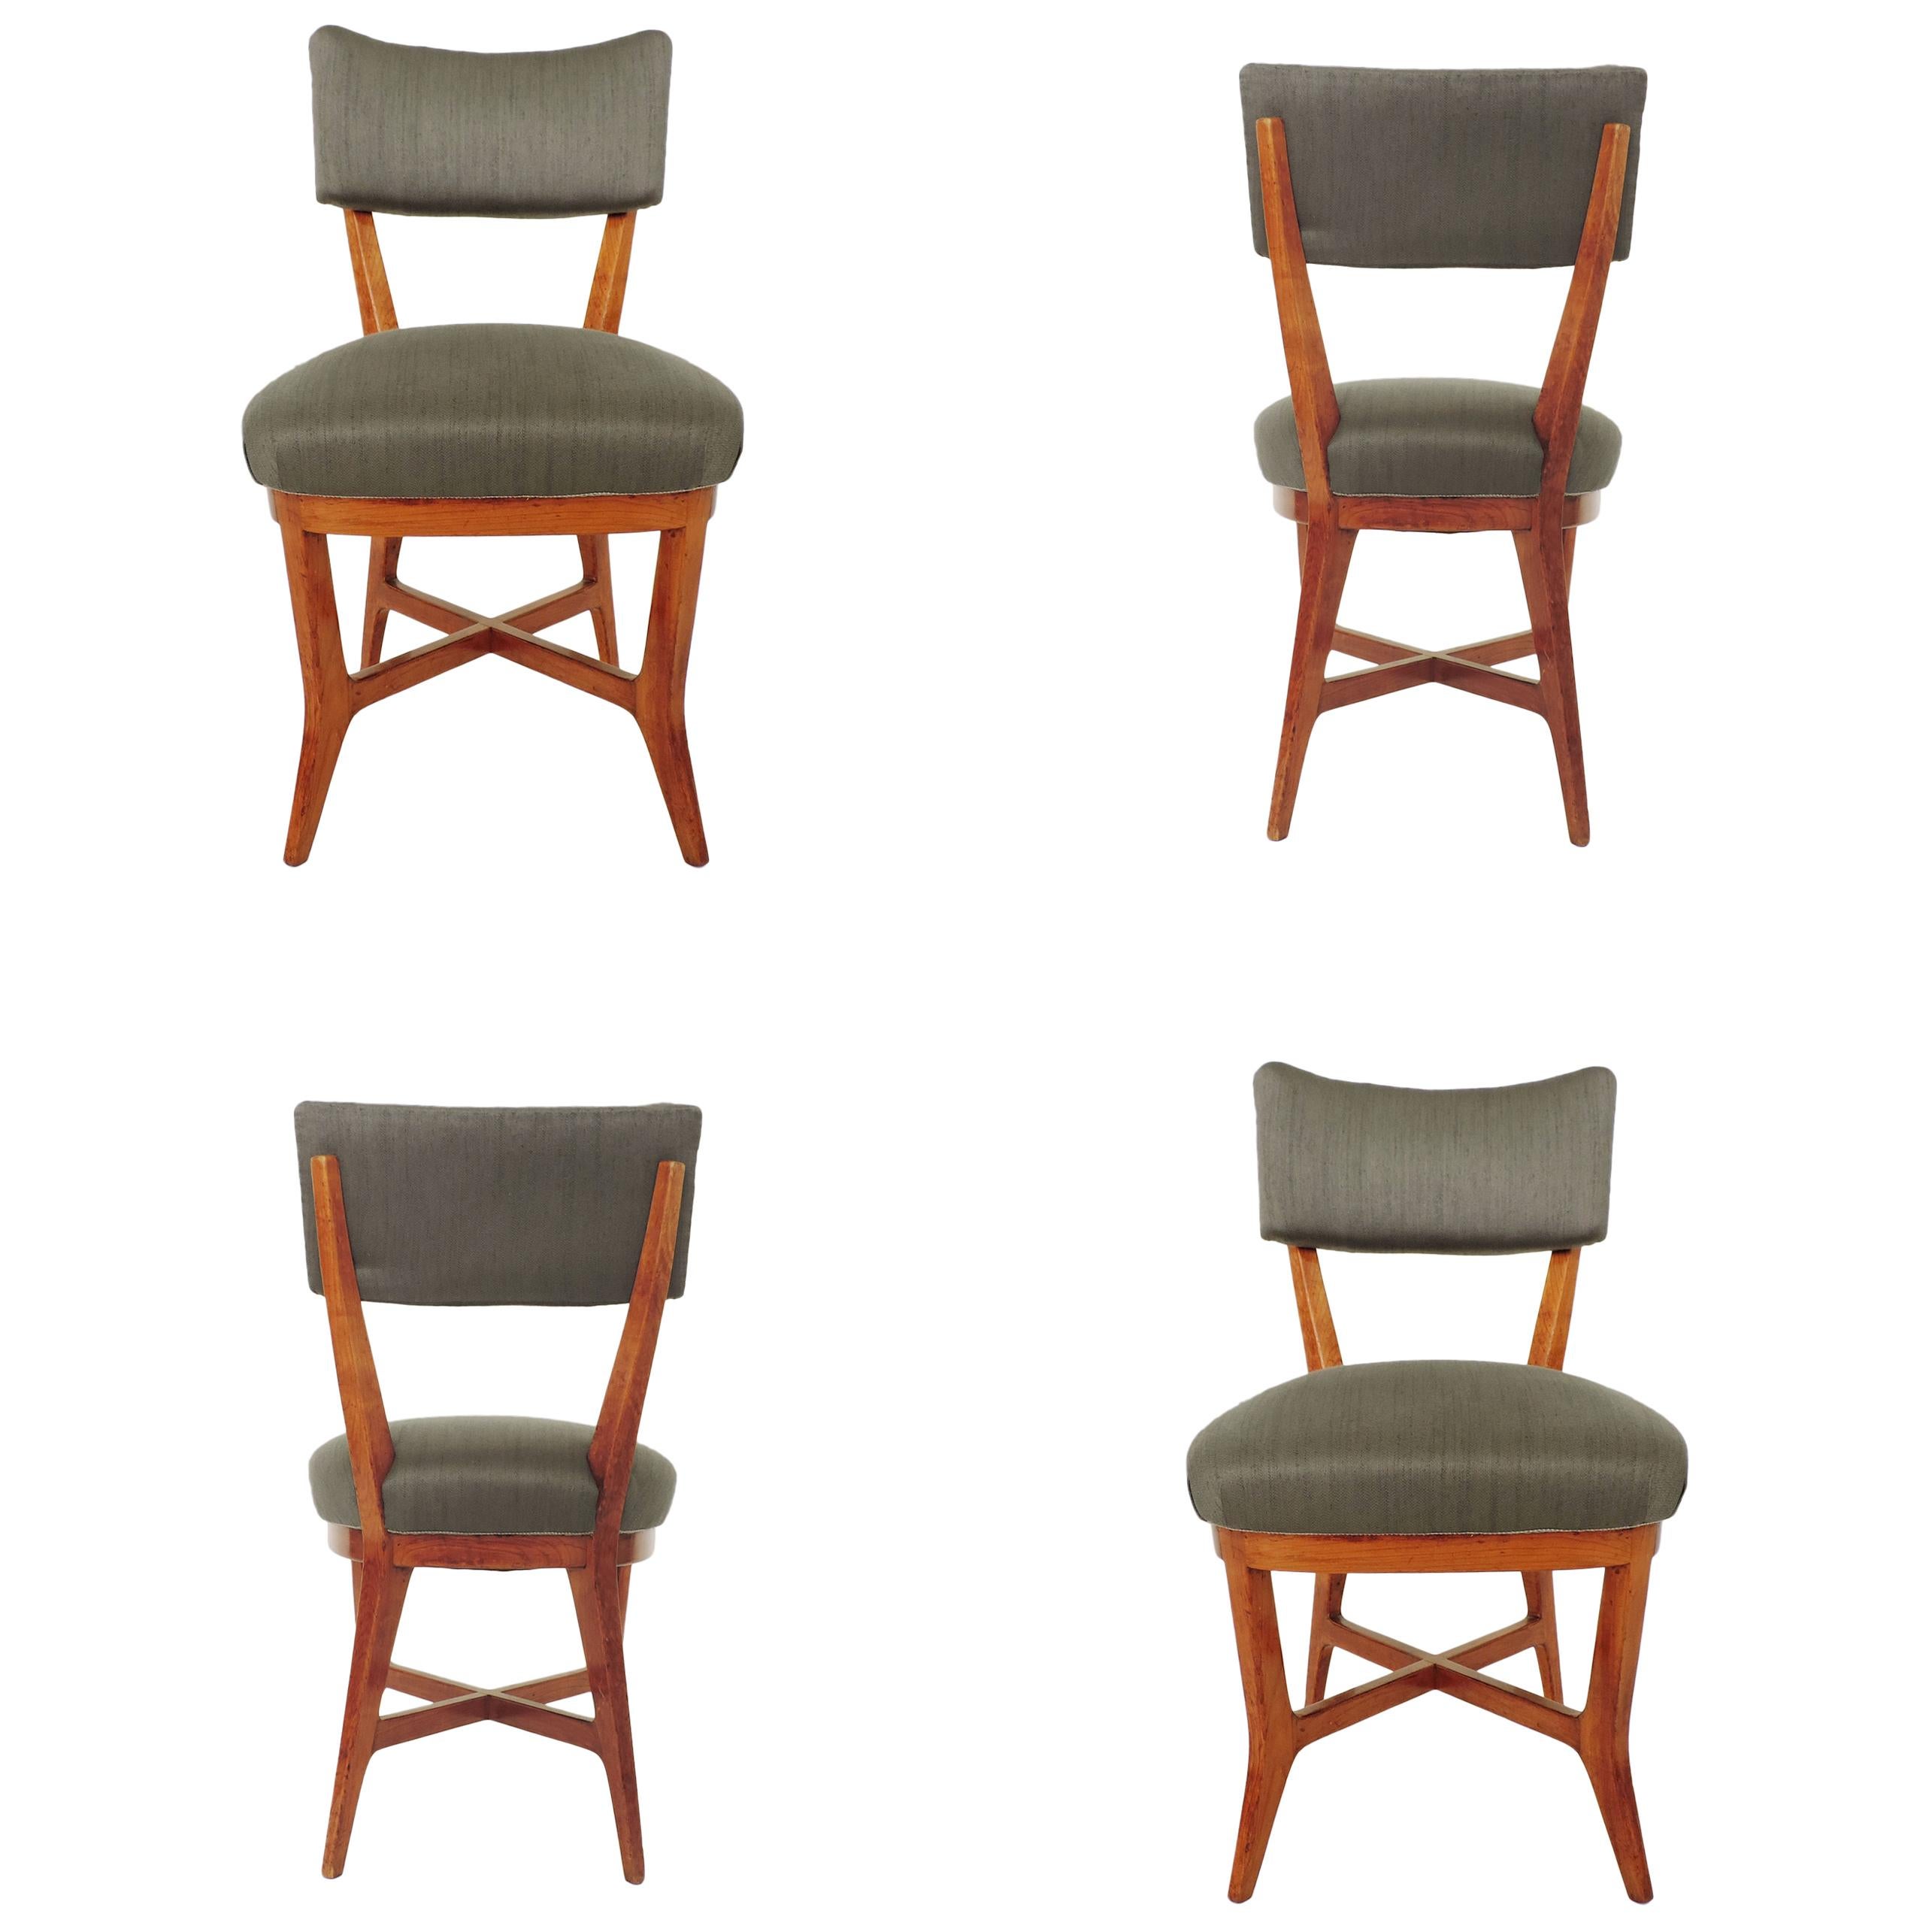 Four Chairs Attributed to Studio BBPR, Italy, 1940s